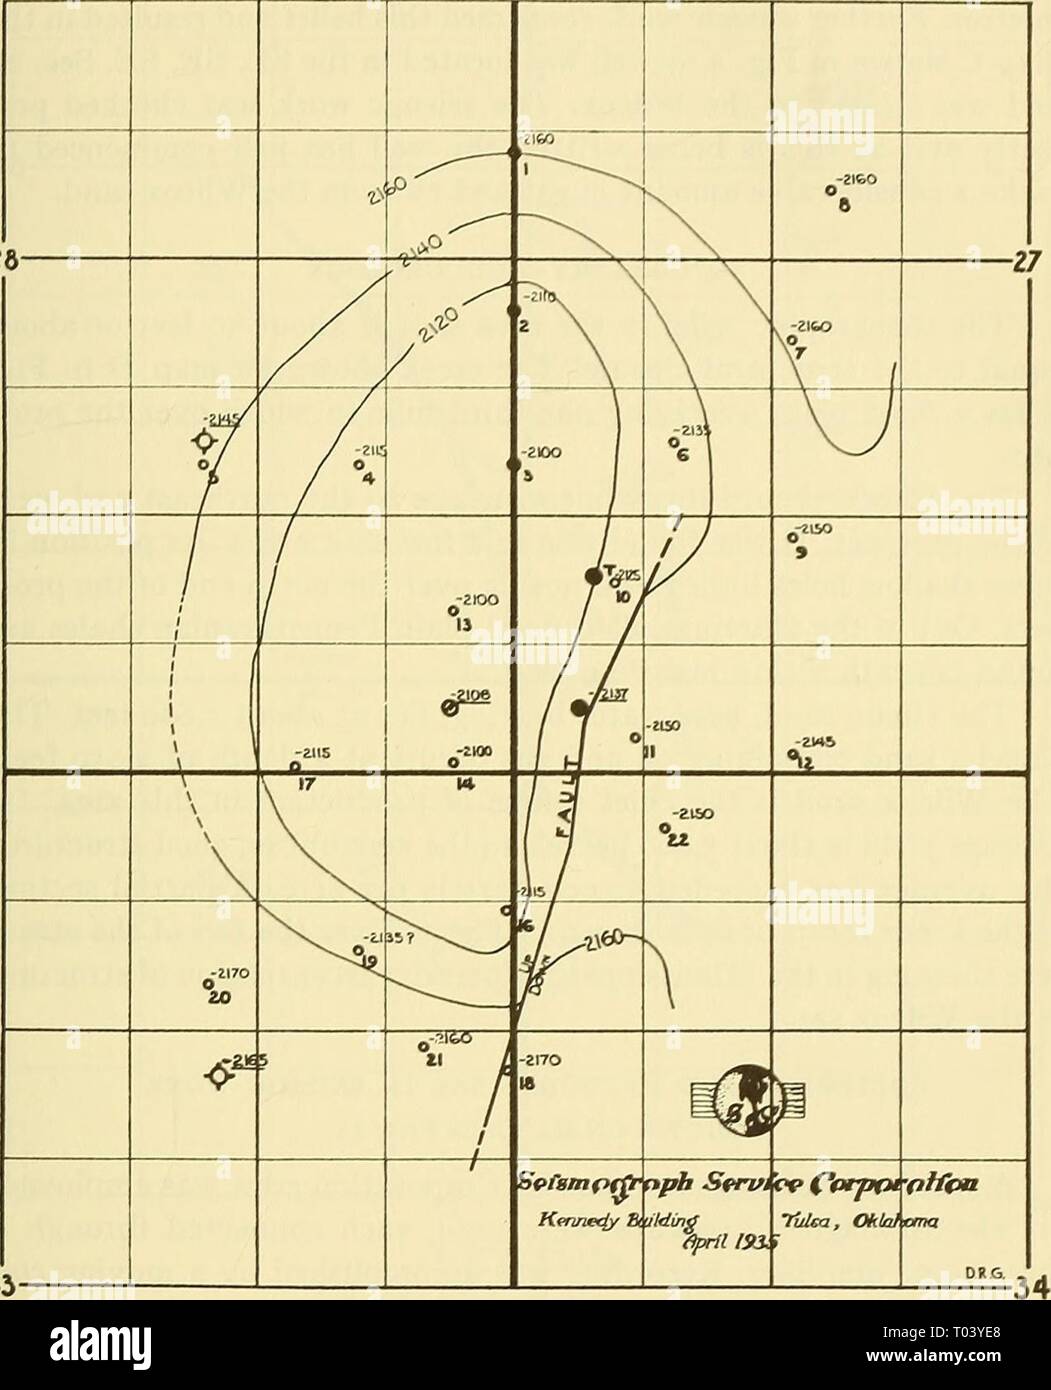 Early geophysical papers of the Society of Exploration Geophysicists . earlygeophysical00soci Year: 1947  DISCOVERY BY REFLECTION SEISMOGRAPH 47 L.LC0. So. Oklahoma Central Area tI5n rMe Okmulgee Co. Okla.    Map C LEGEND 6â¢ Shot point with seismic Viola datum -1145 Actual Viola datun â¢T Pemsylvanian Taneha sand producing well â¢ Wilcox sand producing well â¢ Drilling well â $- Dry hole Fig. 3 291 Stock Photo